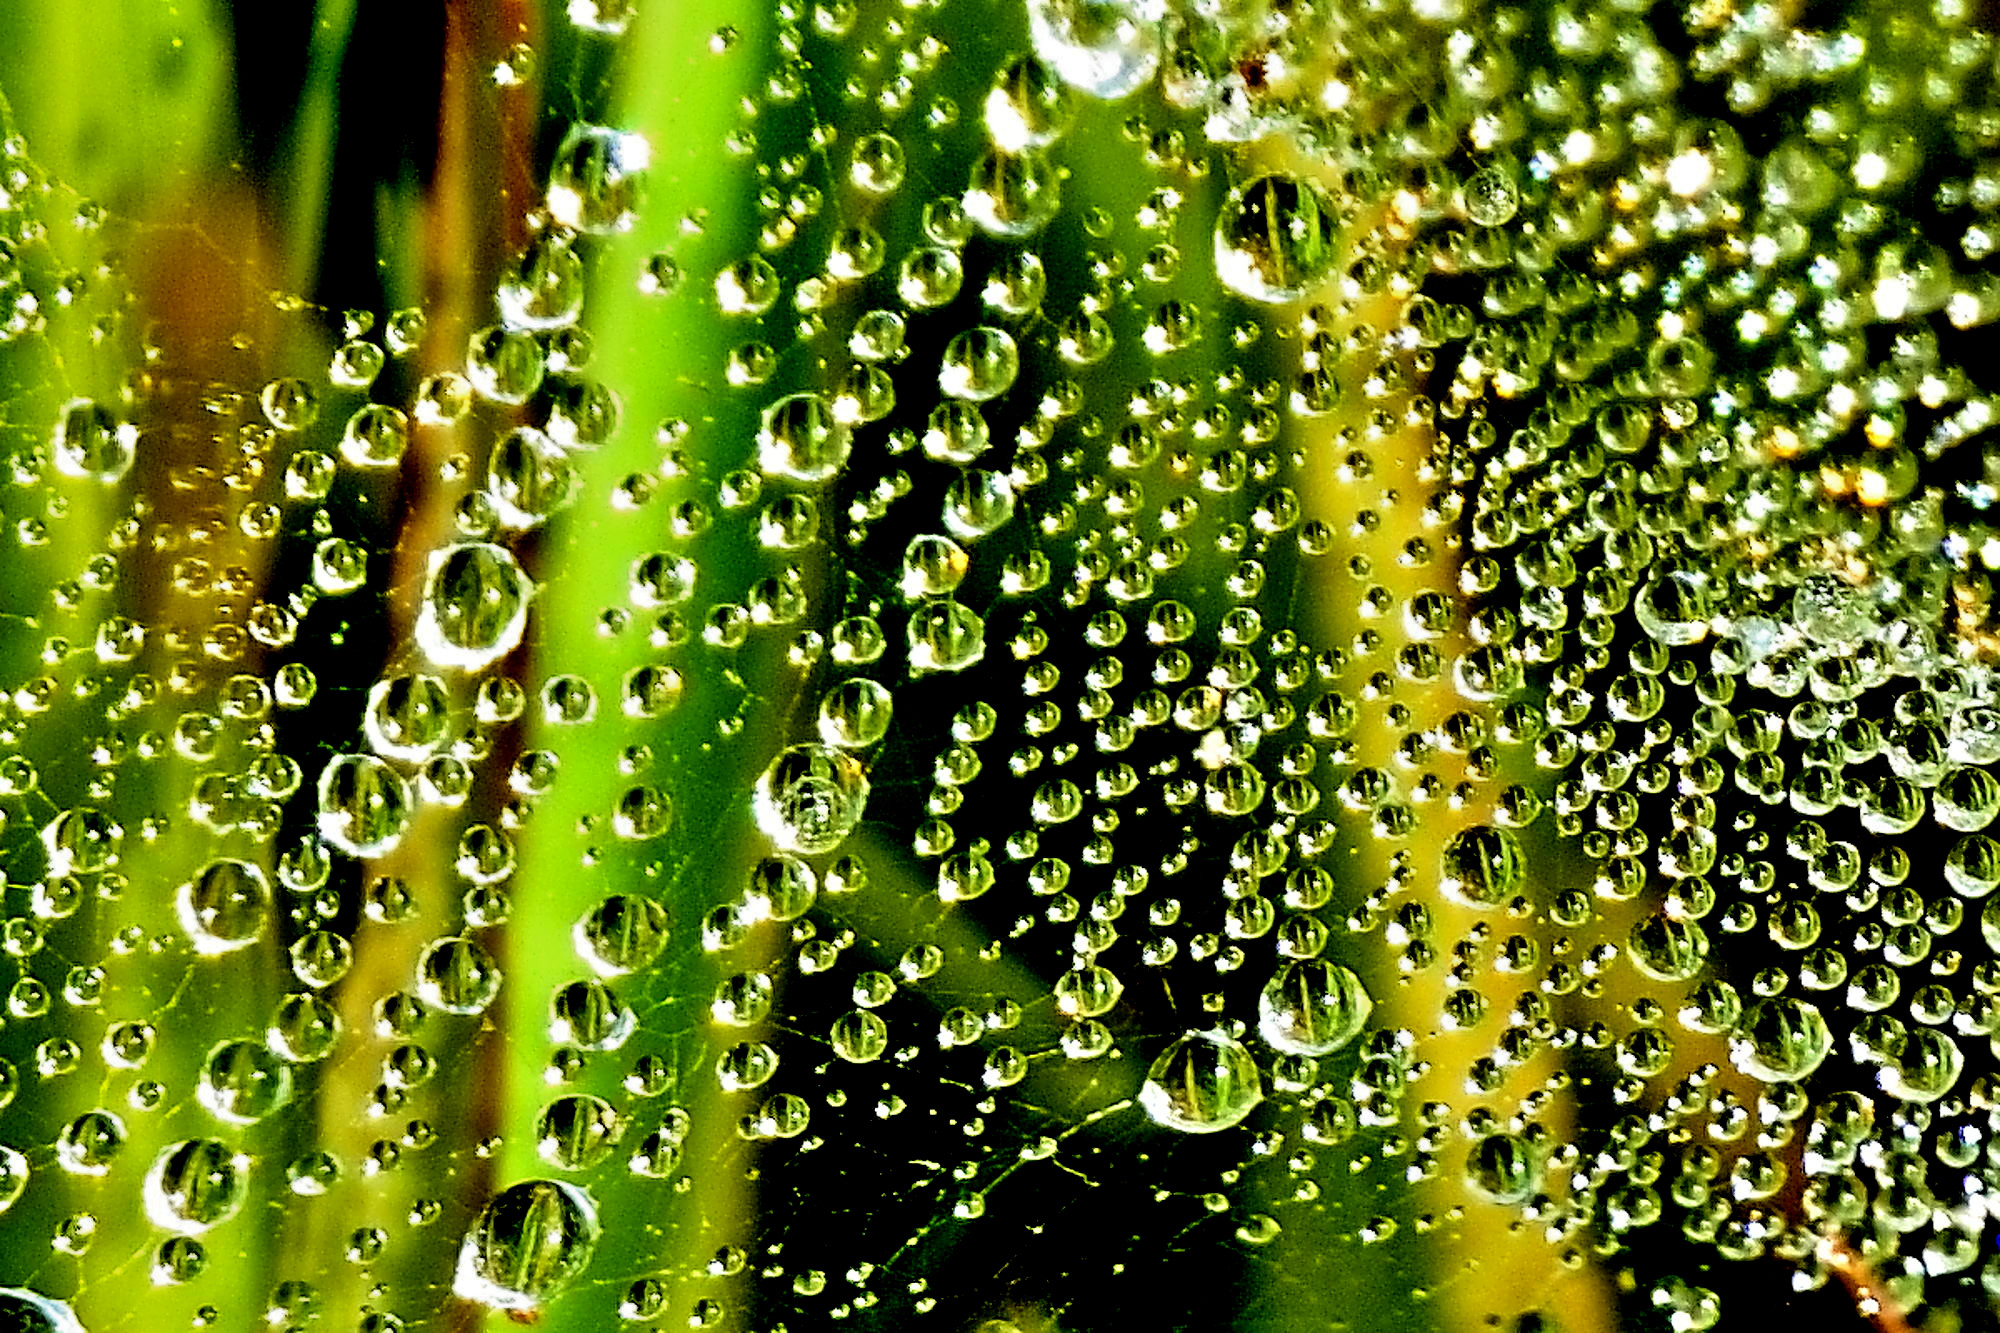 Drops of morning dew...